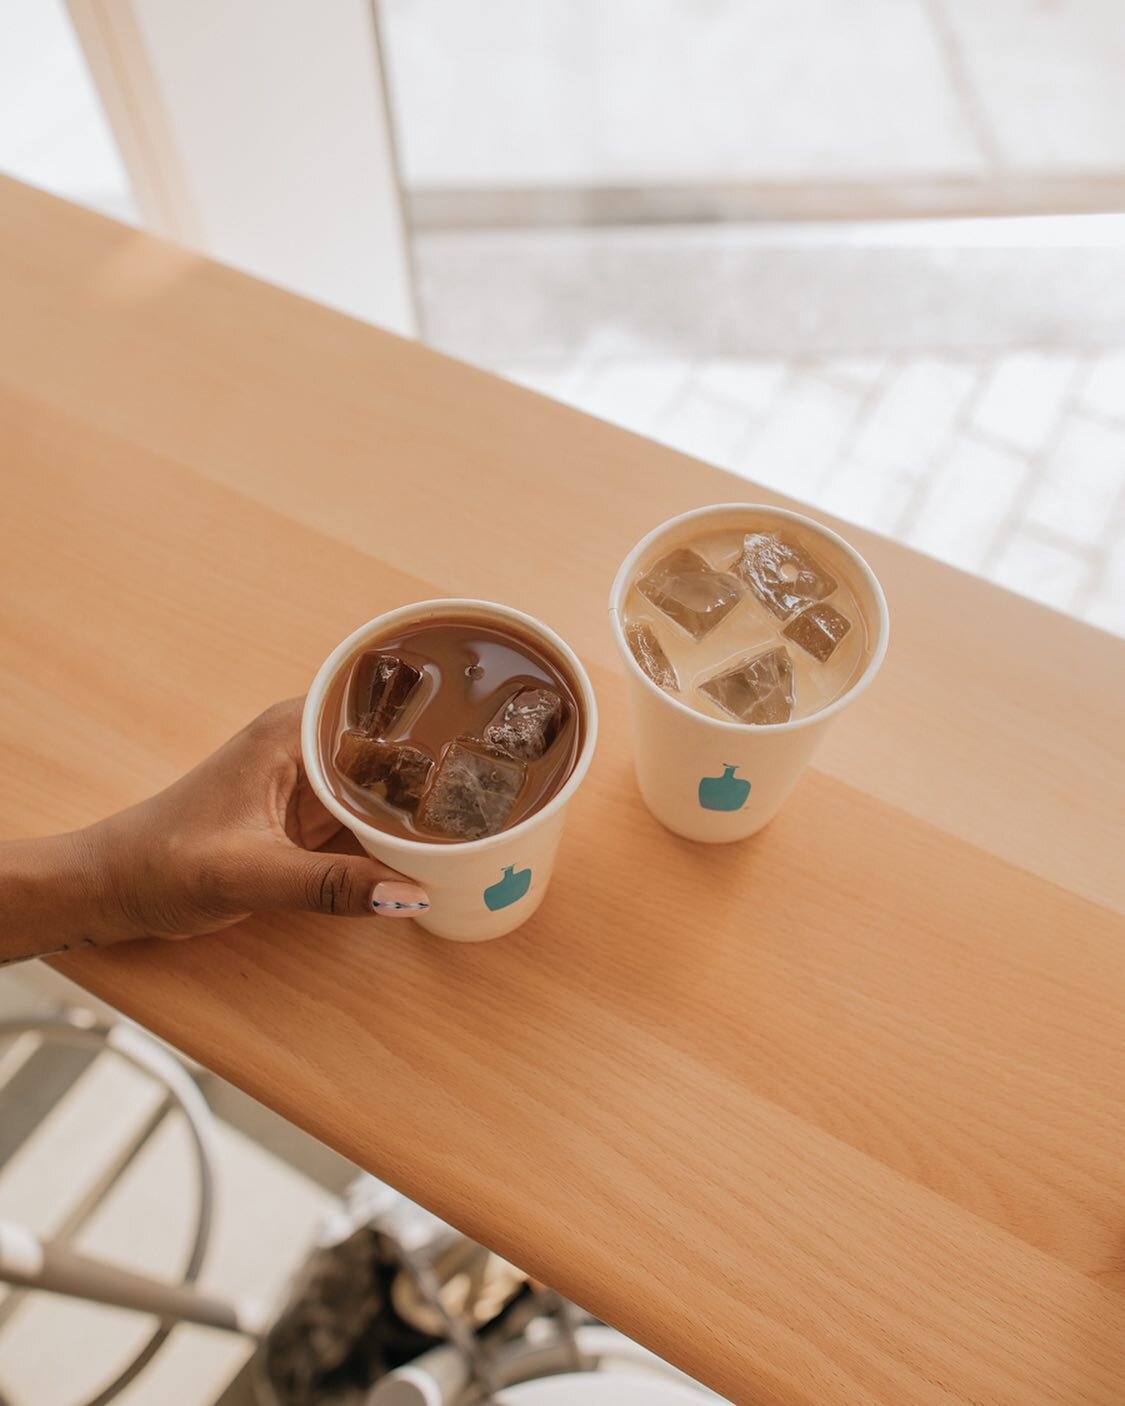 Cold brew or latte? ☕️ if you haven&rsquo;t been to @bluebottle yet you need to go this weekend because the vibes are immaculate&mdash;stunning interior, great offerings + right on the river